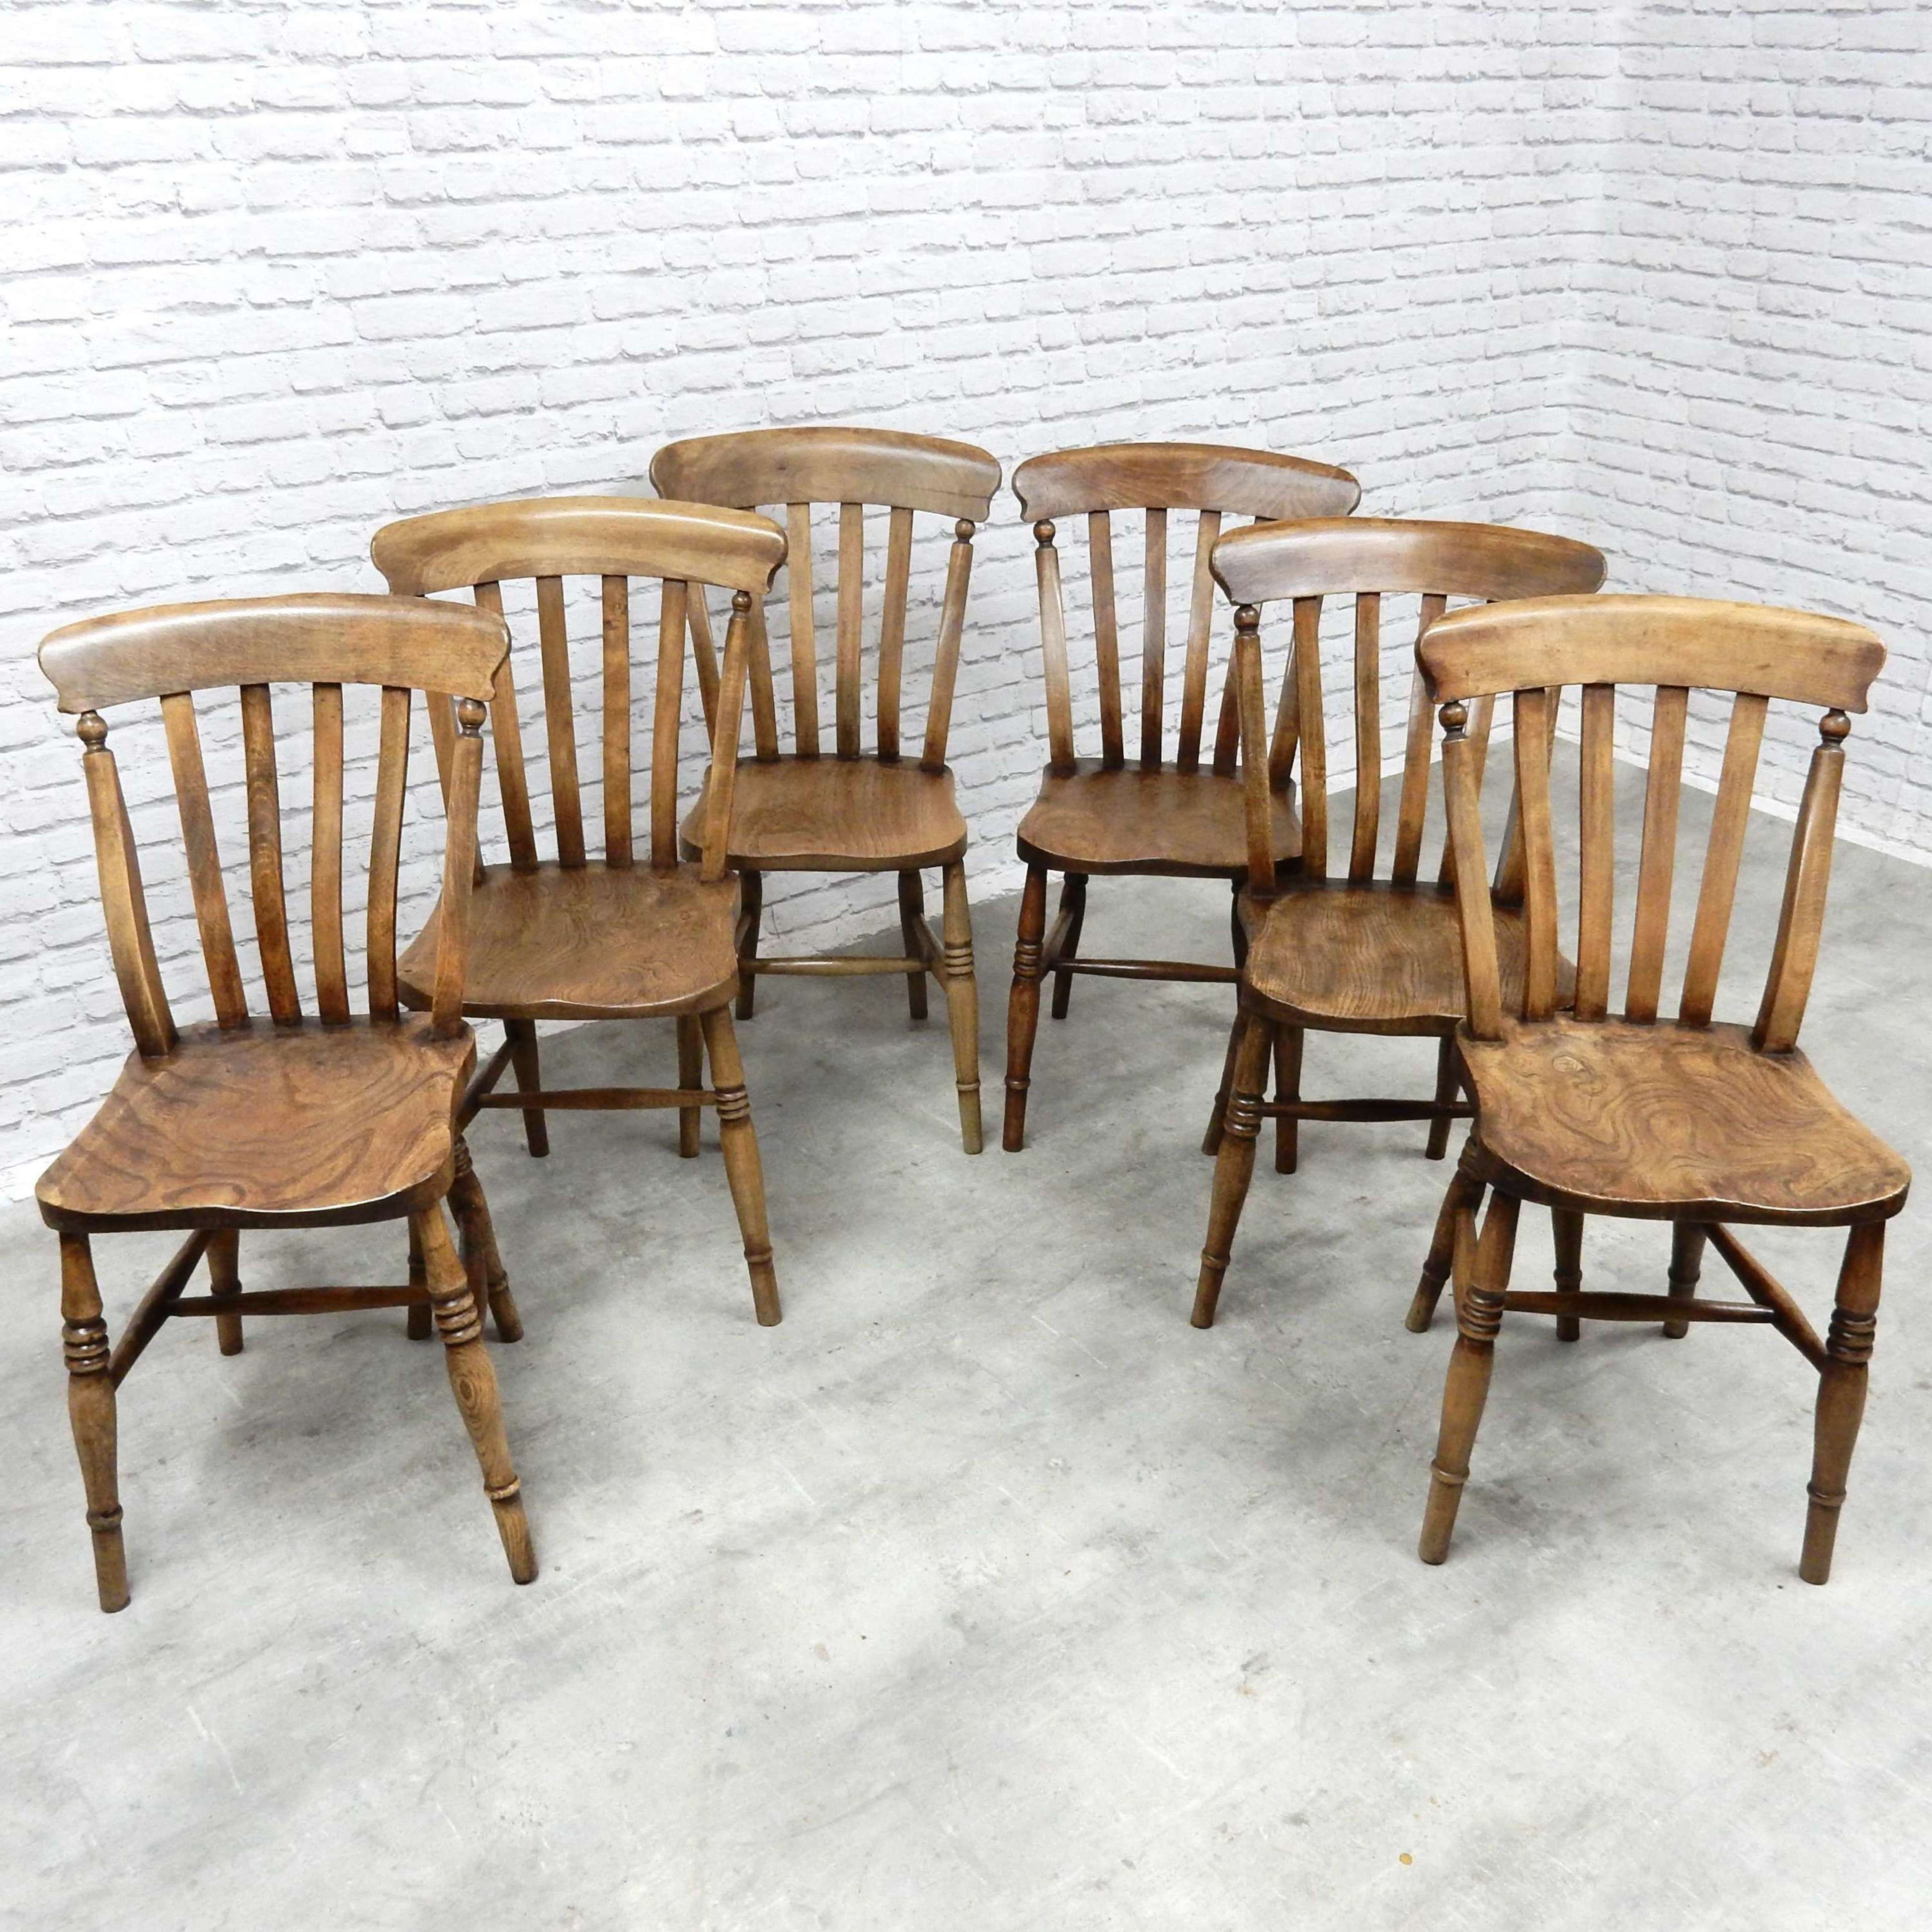 Antique Farmhouse Kitchen Chairs In Antique Dining Chairs